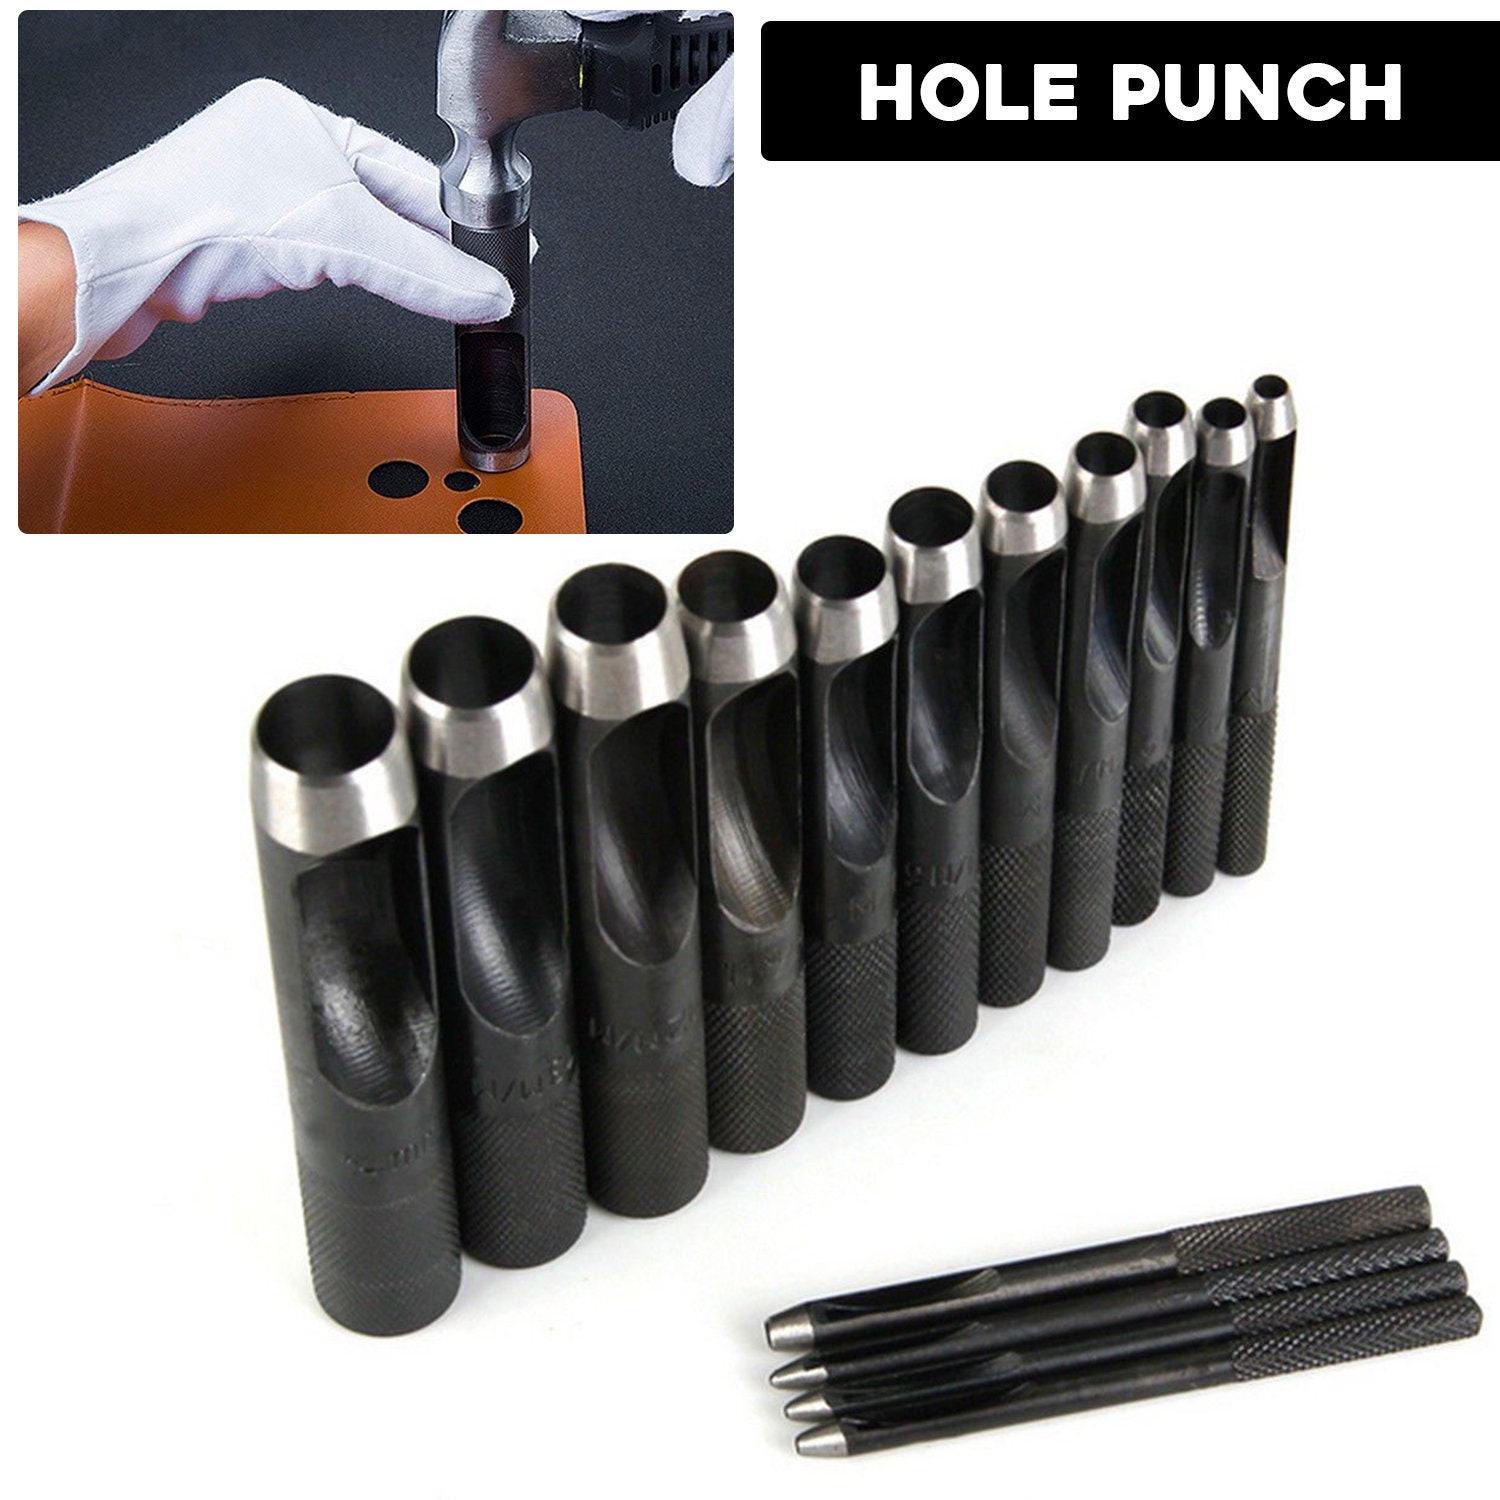 Hole Cutting Set for Fabric - Self Centering Hole Cutter for Fabric